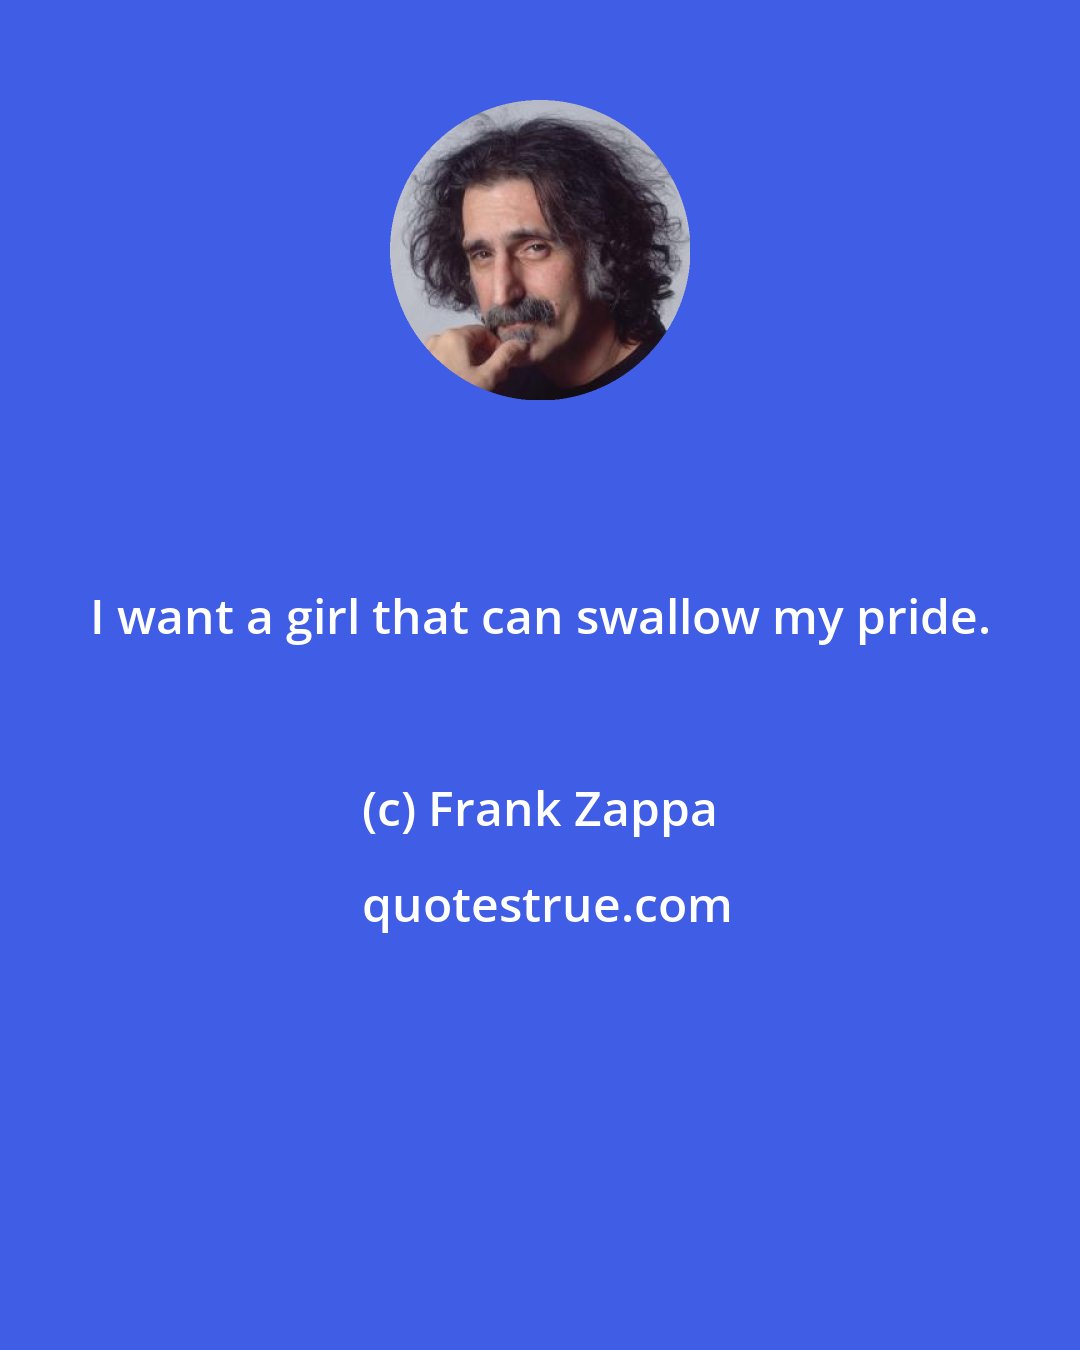 Frank Zappa: I want a girl that can swallow my pride.